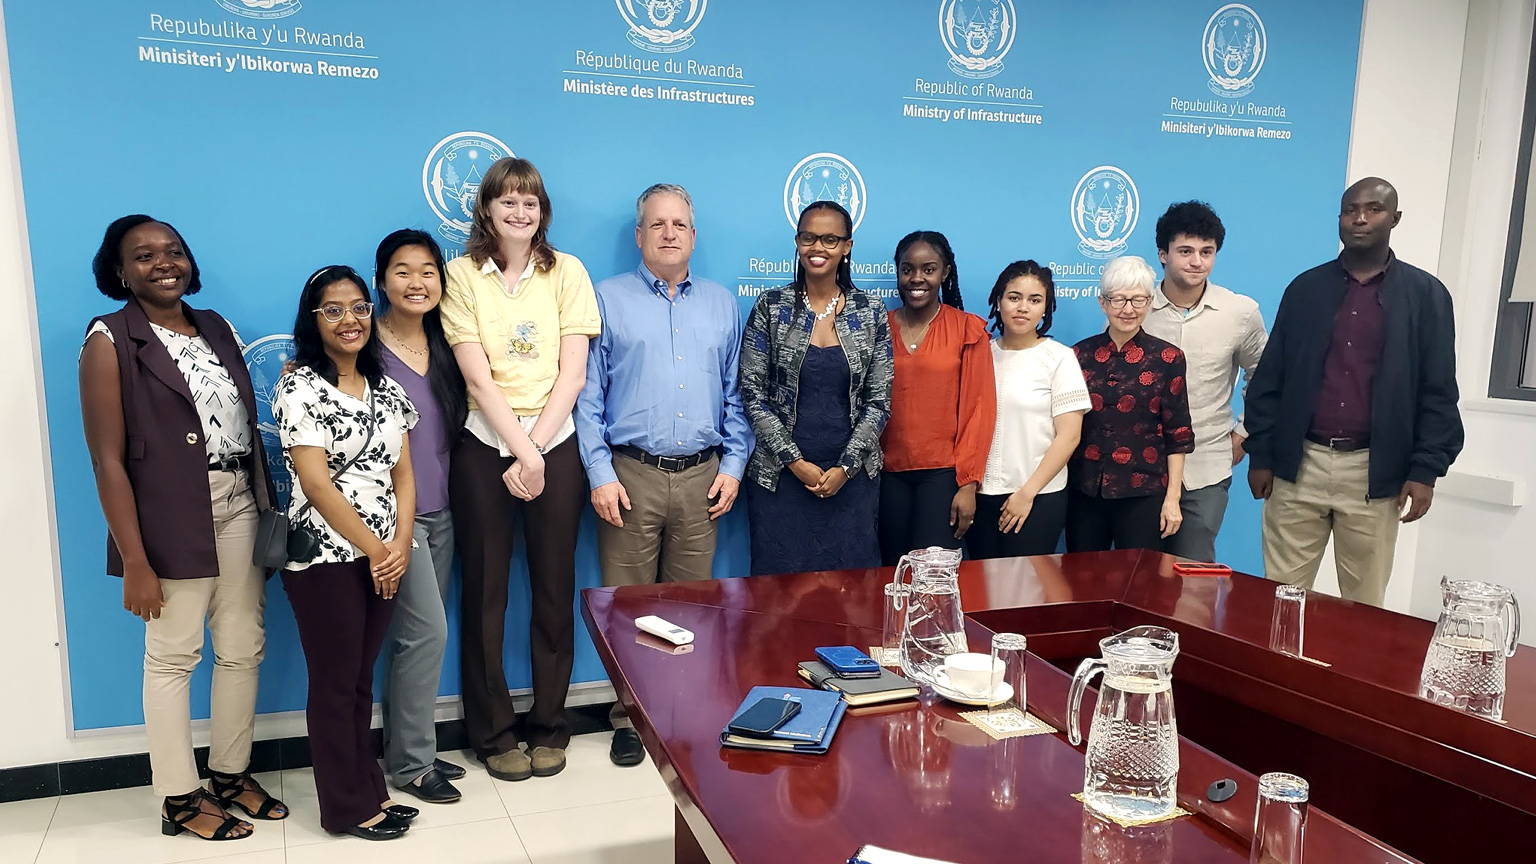 Group photo of Georgia Tech students and faculty with Patricie Uwase, in a conference room